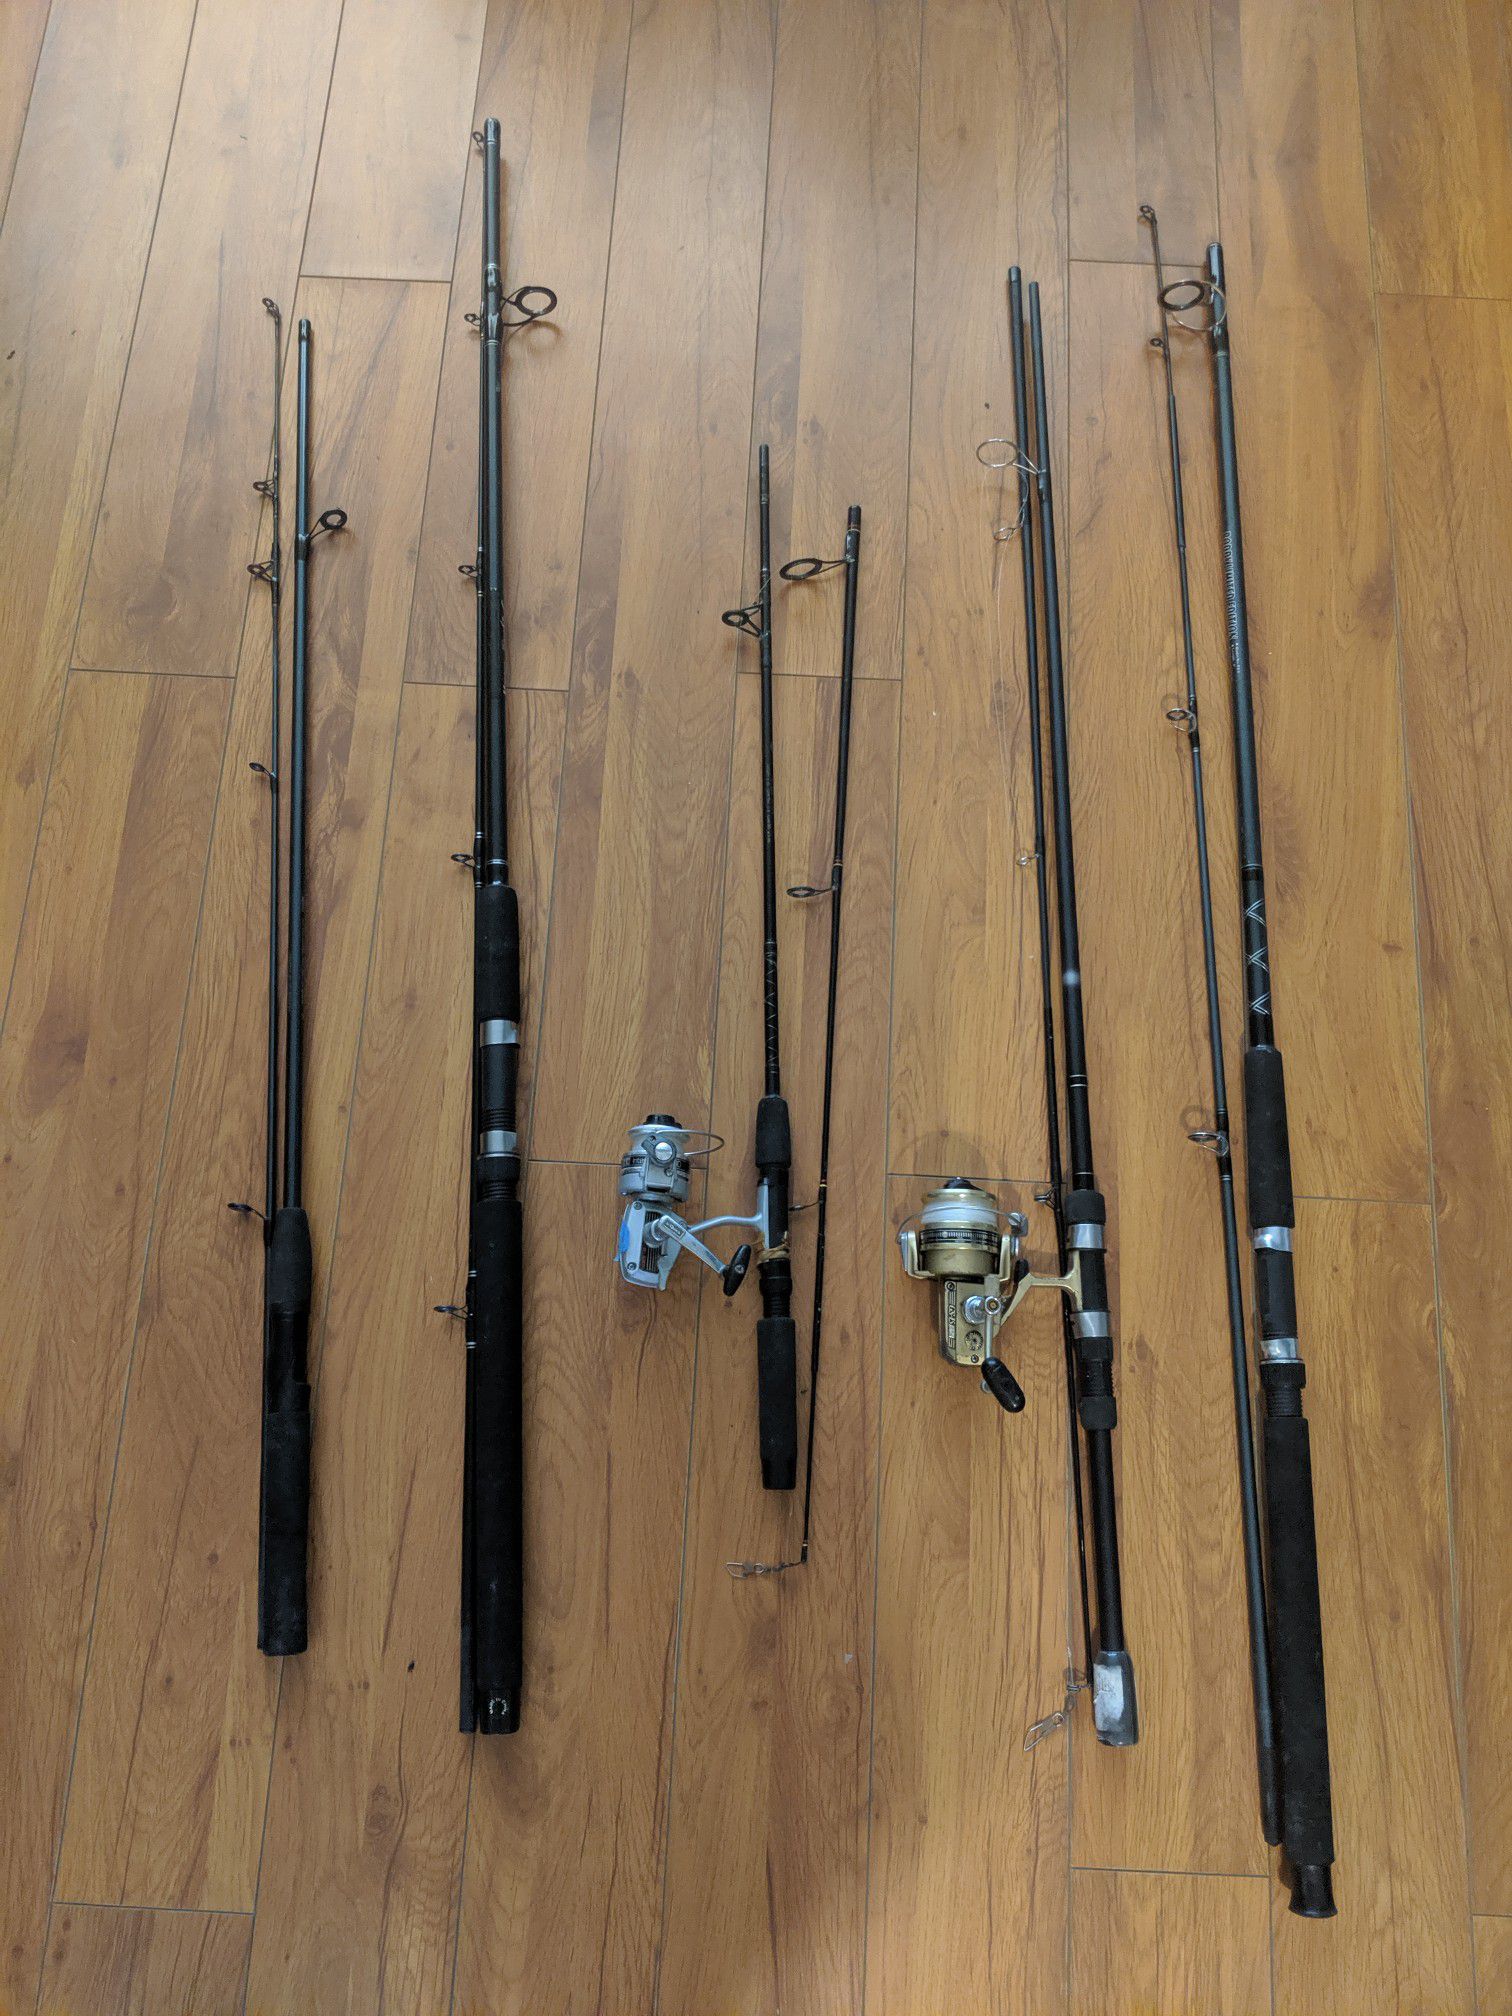 5 Fishing pools. And 2 reels. Used